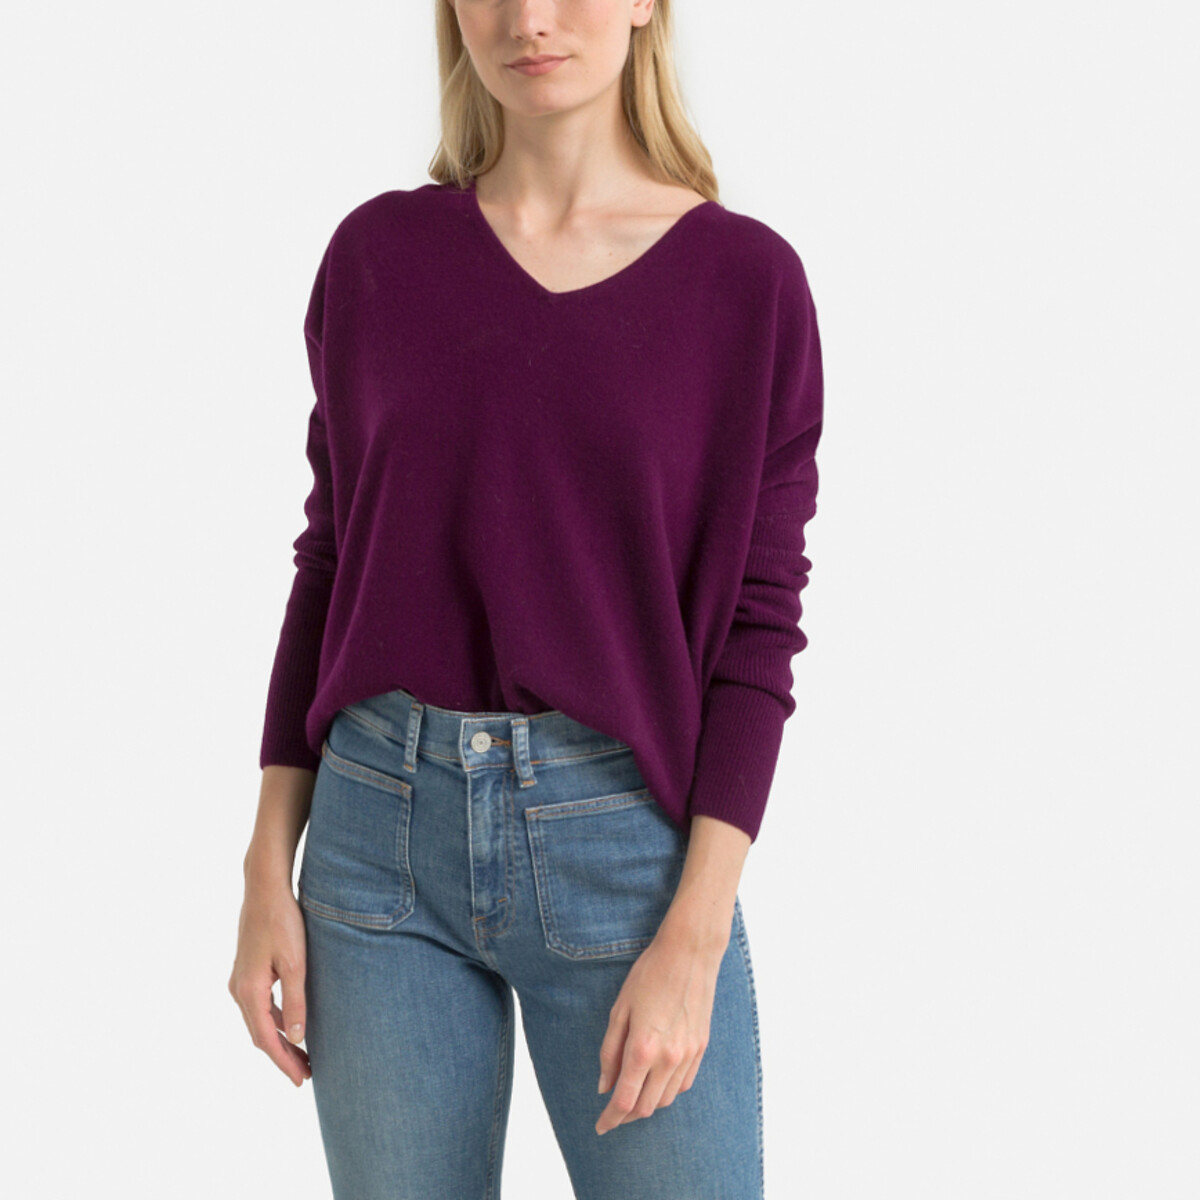 Arnito Blueberry Jumper in Merino Wool with V-Neck